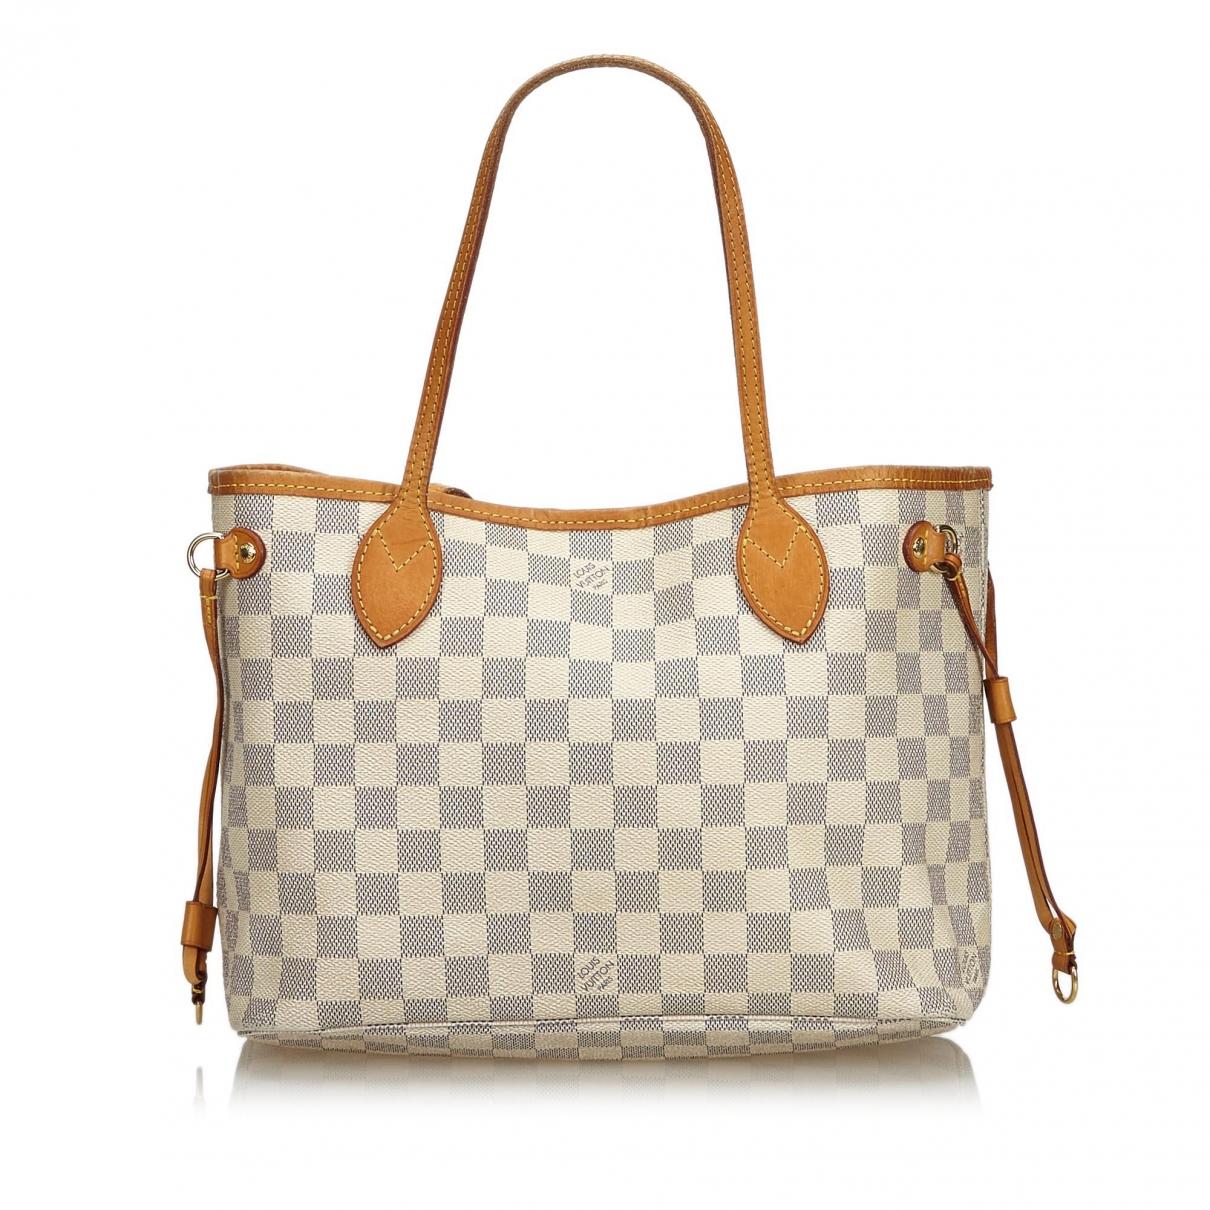 Lyst - Louis Vuitton Neverfull Cloth Tote in White